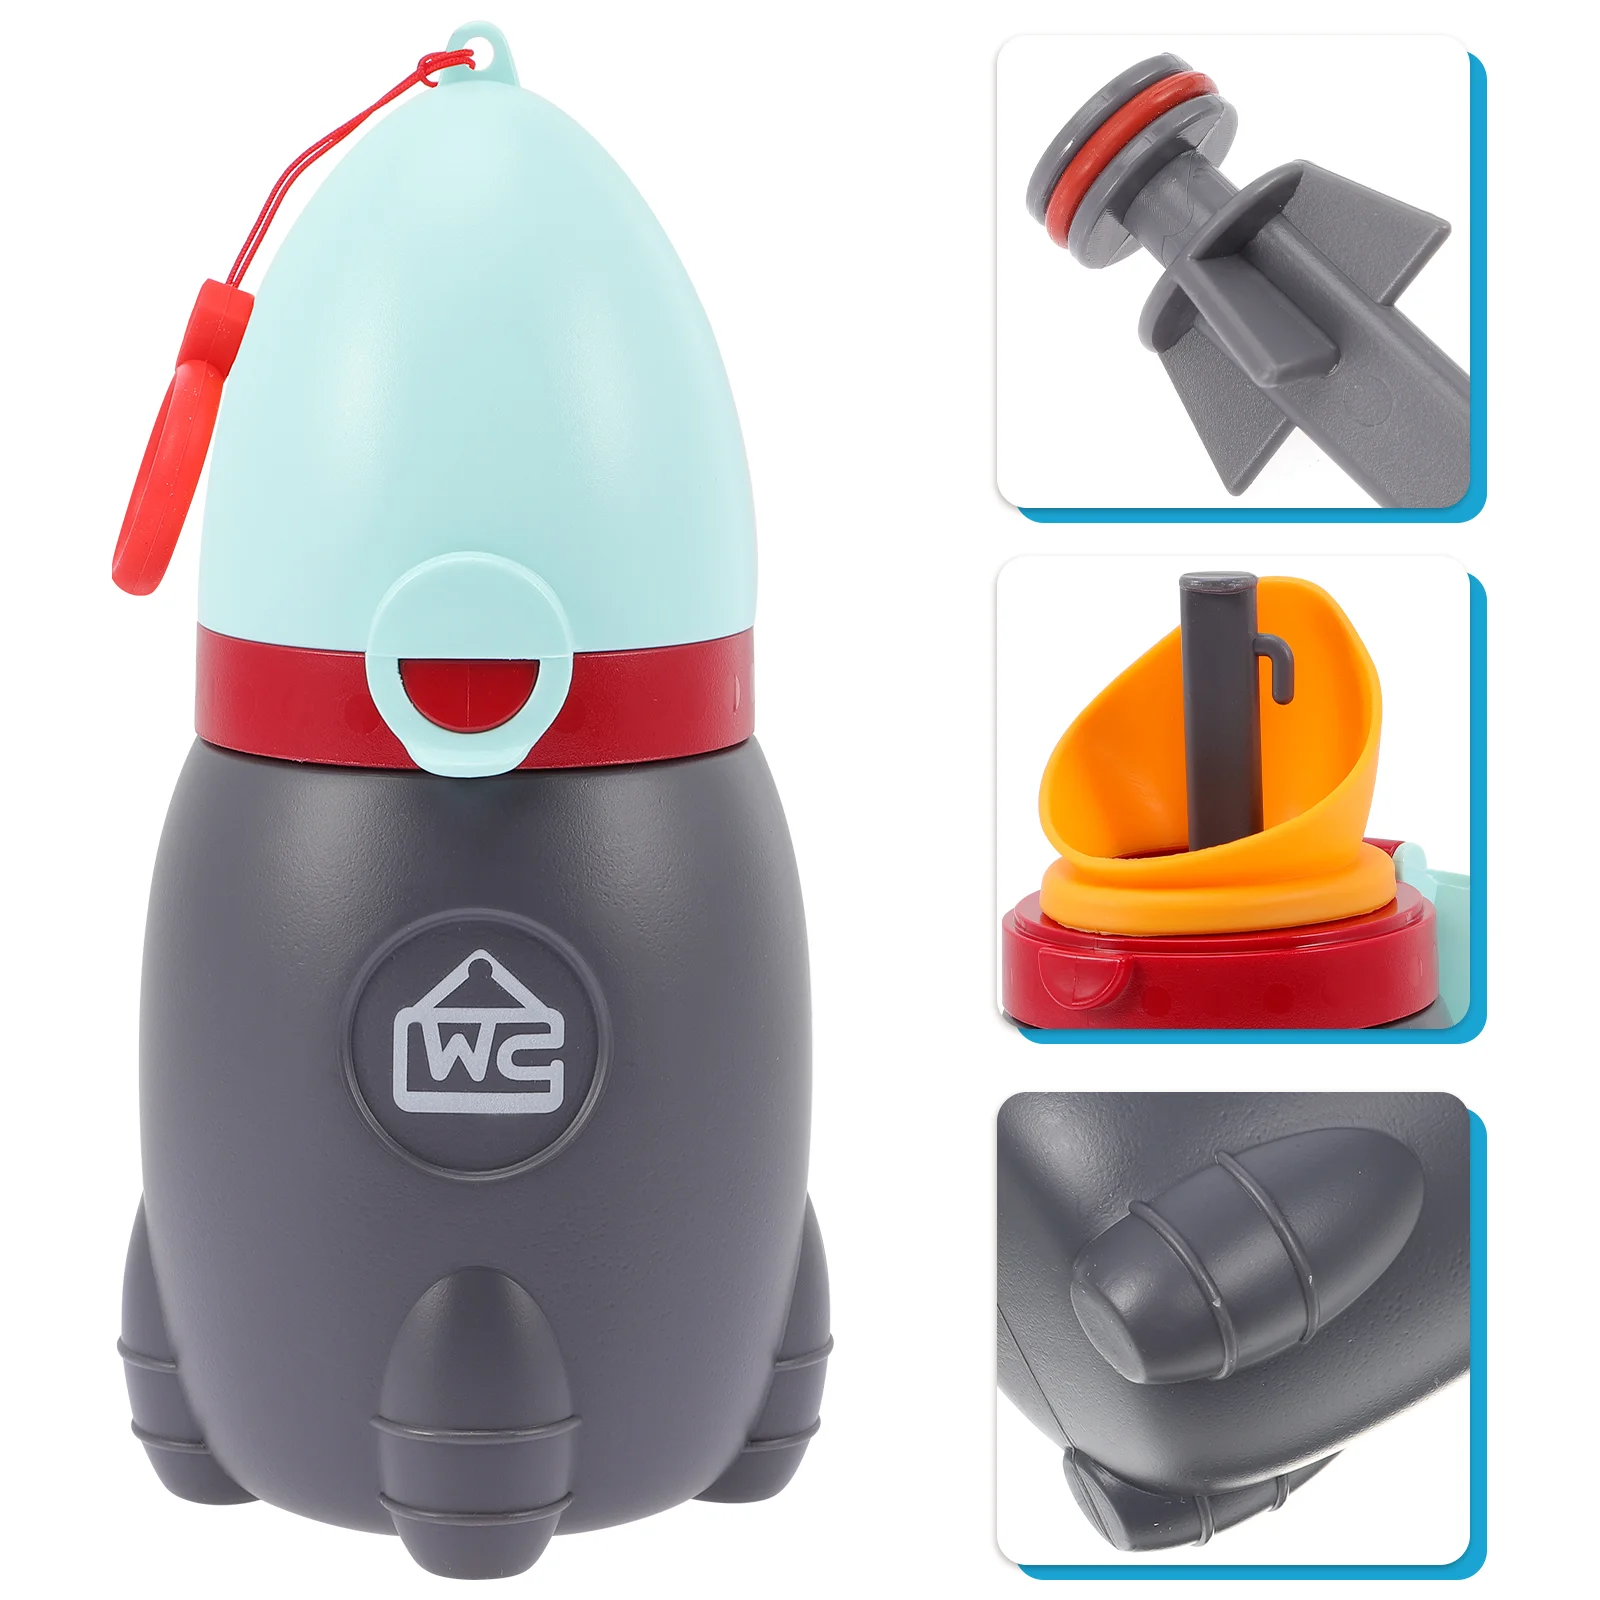 

Portable Urinal Toddler Potty Car Kids for Boys Toddlers Silica Gel Travel Baby Stuff Newborn